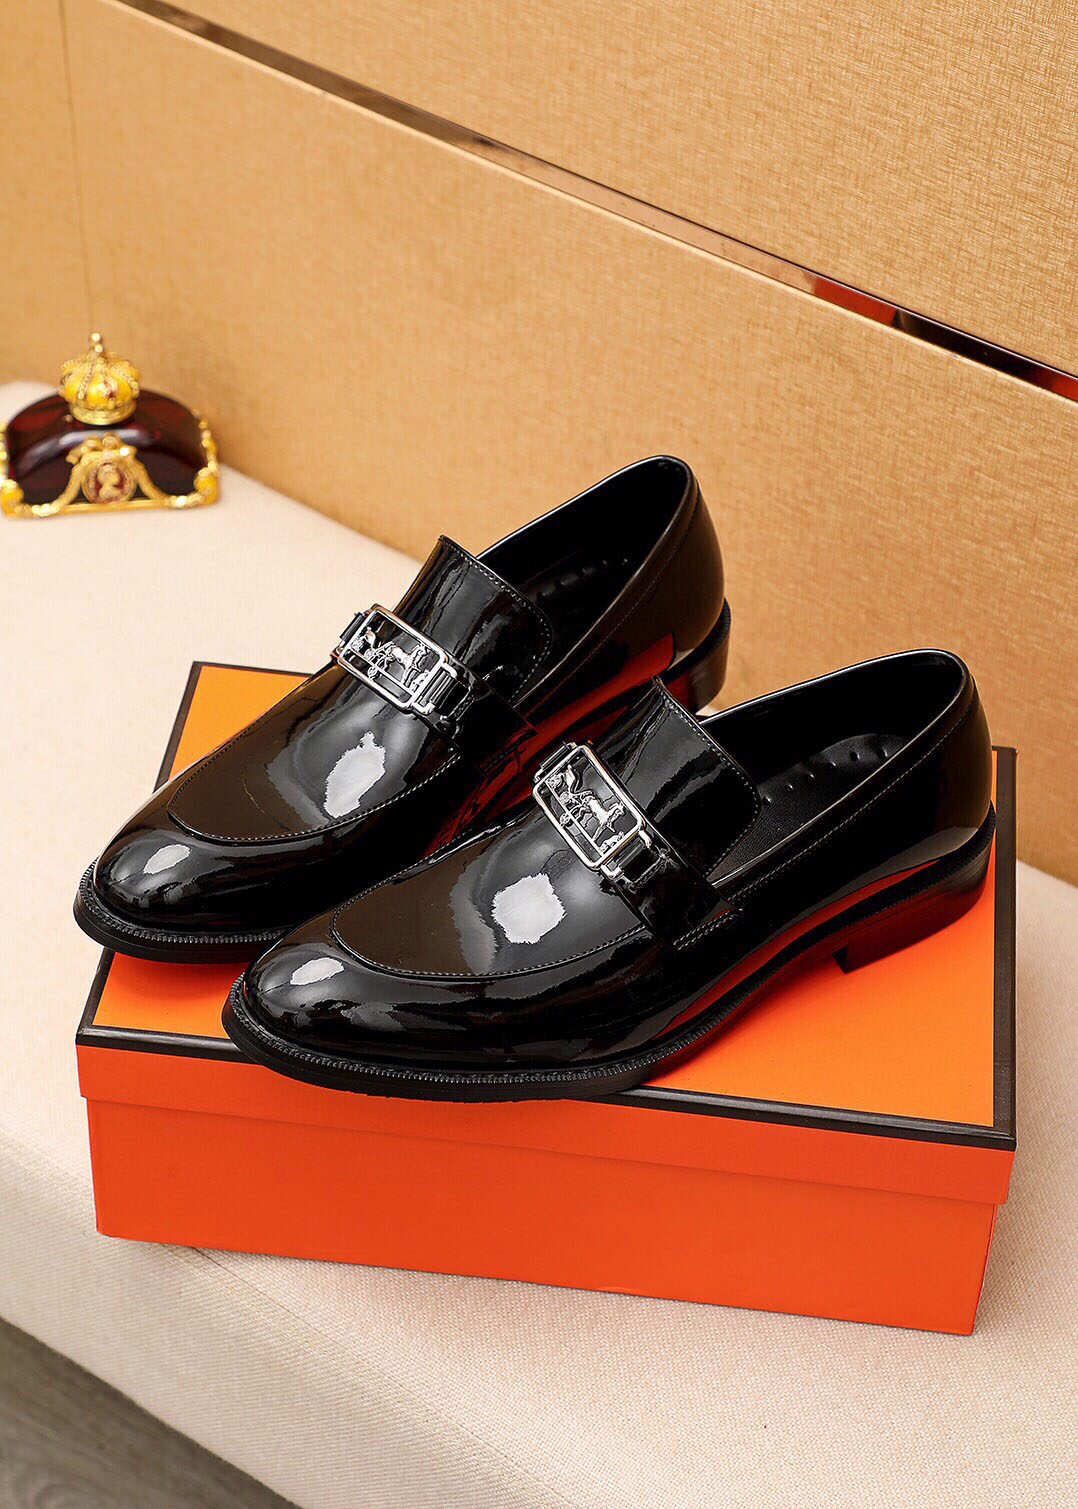 Genuine Leather Business Oxfords: Classy Slip-On Loafers for Men 38-45